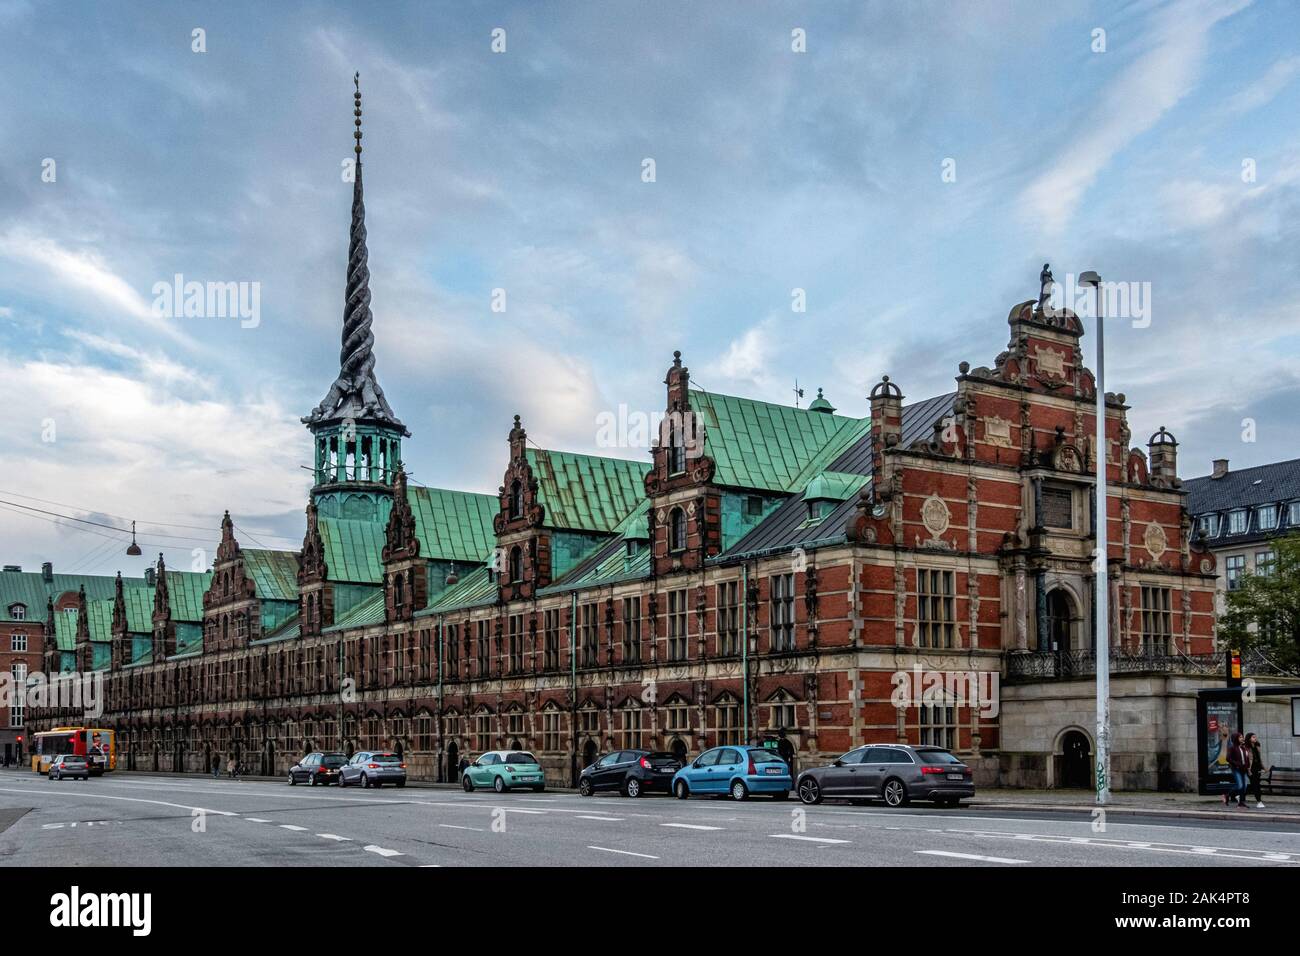 Spire High Resolution Stock Photography and Images - Alamy